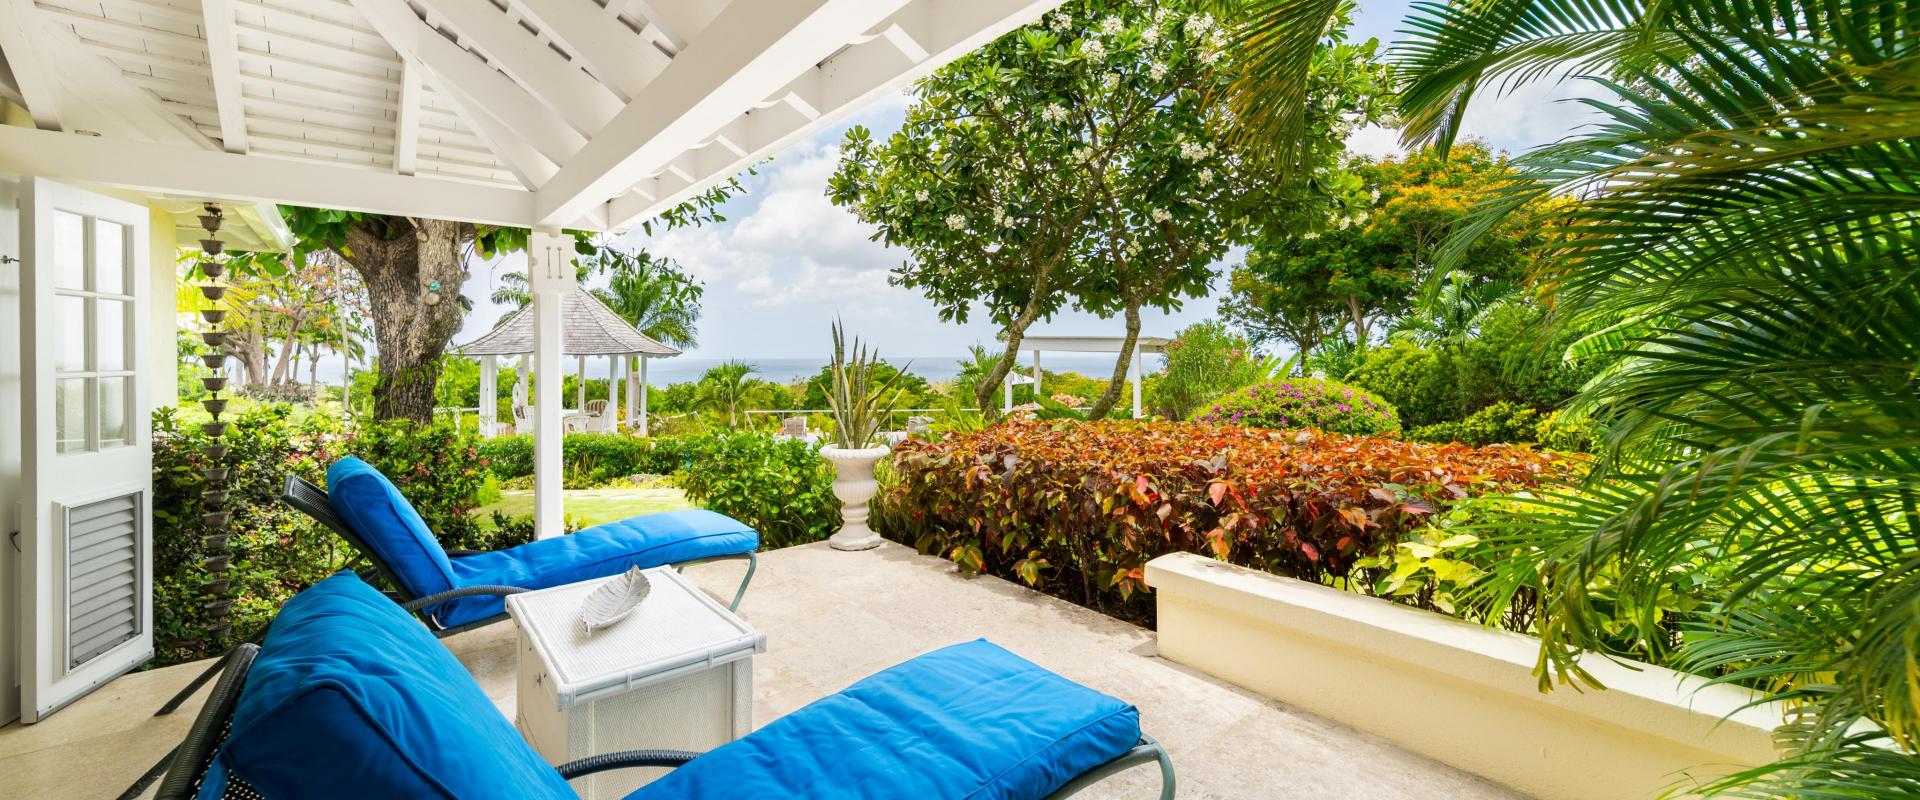 Point of View Holiday Rental In Sandy Lane Barbados Master Bedroom Western Patio With Ocean and Garden Views